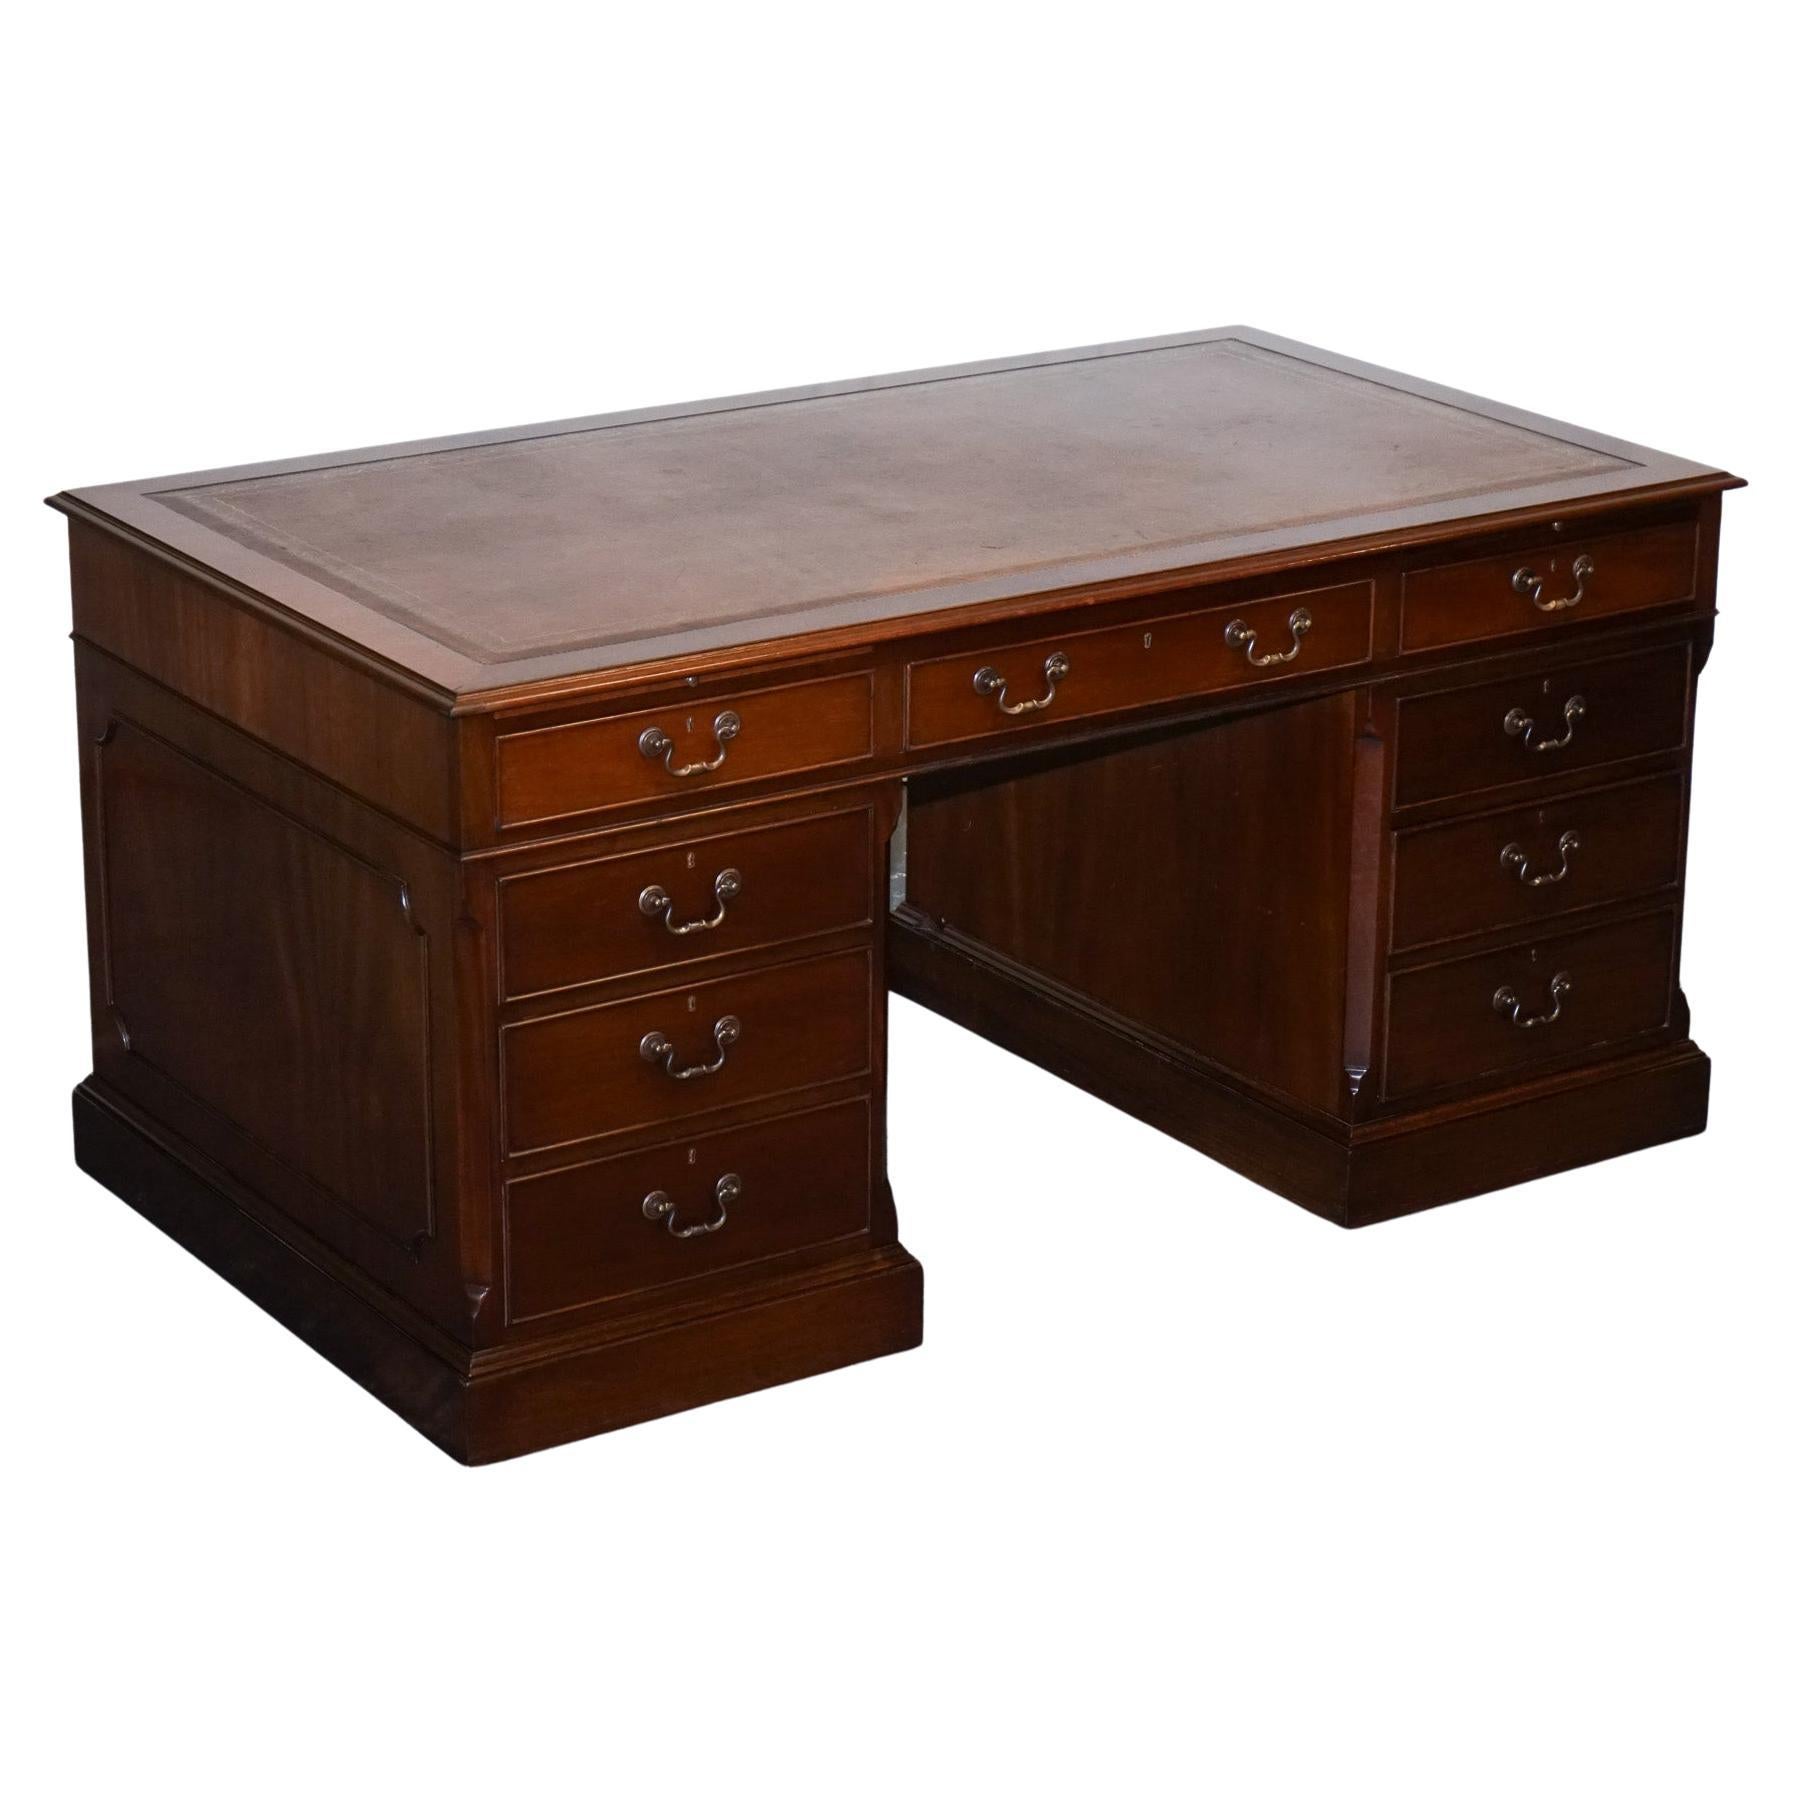 STUNNING LARGE TWiN PEDESTAL DESK BROWN LEATHER TOP SLIDING OUT TRAYS 8 DRAWERS For Sale